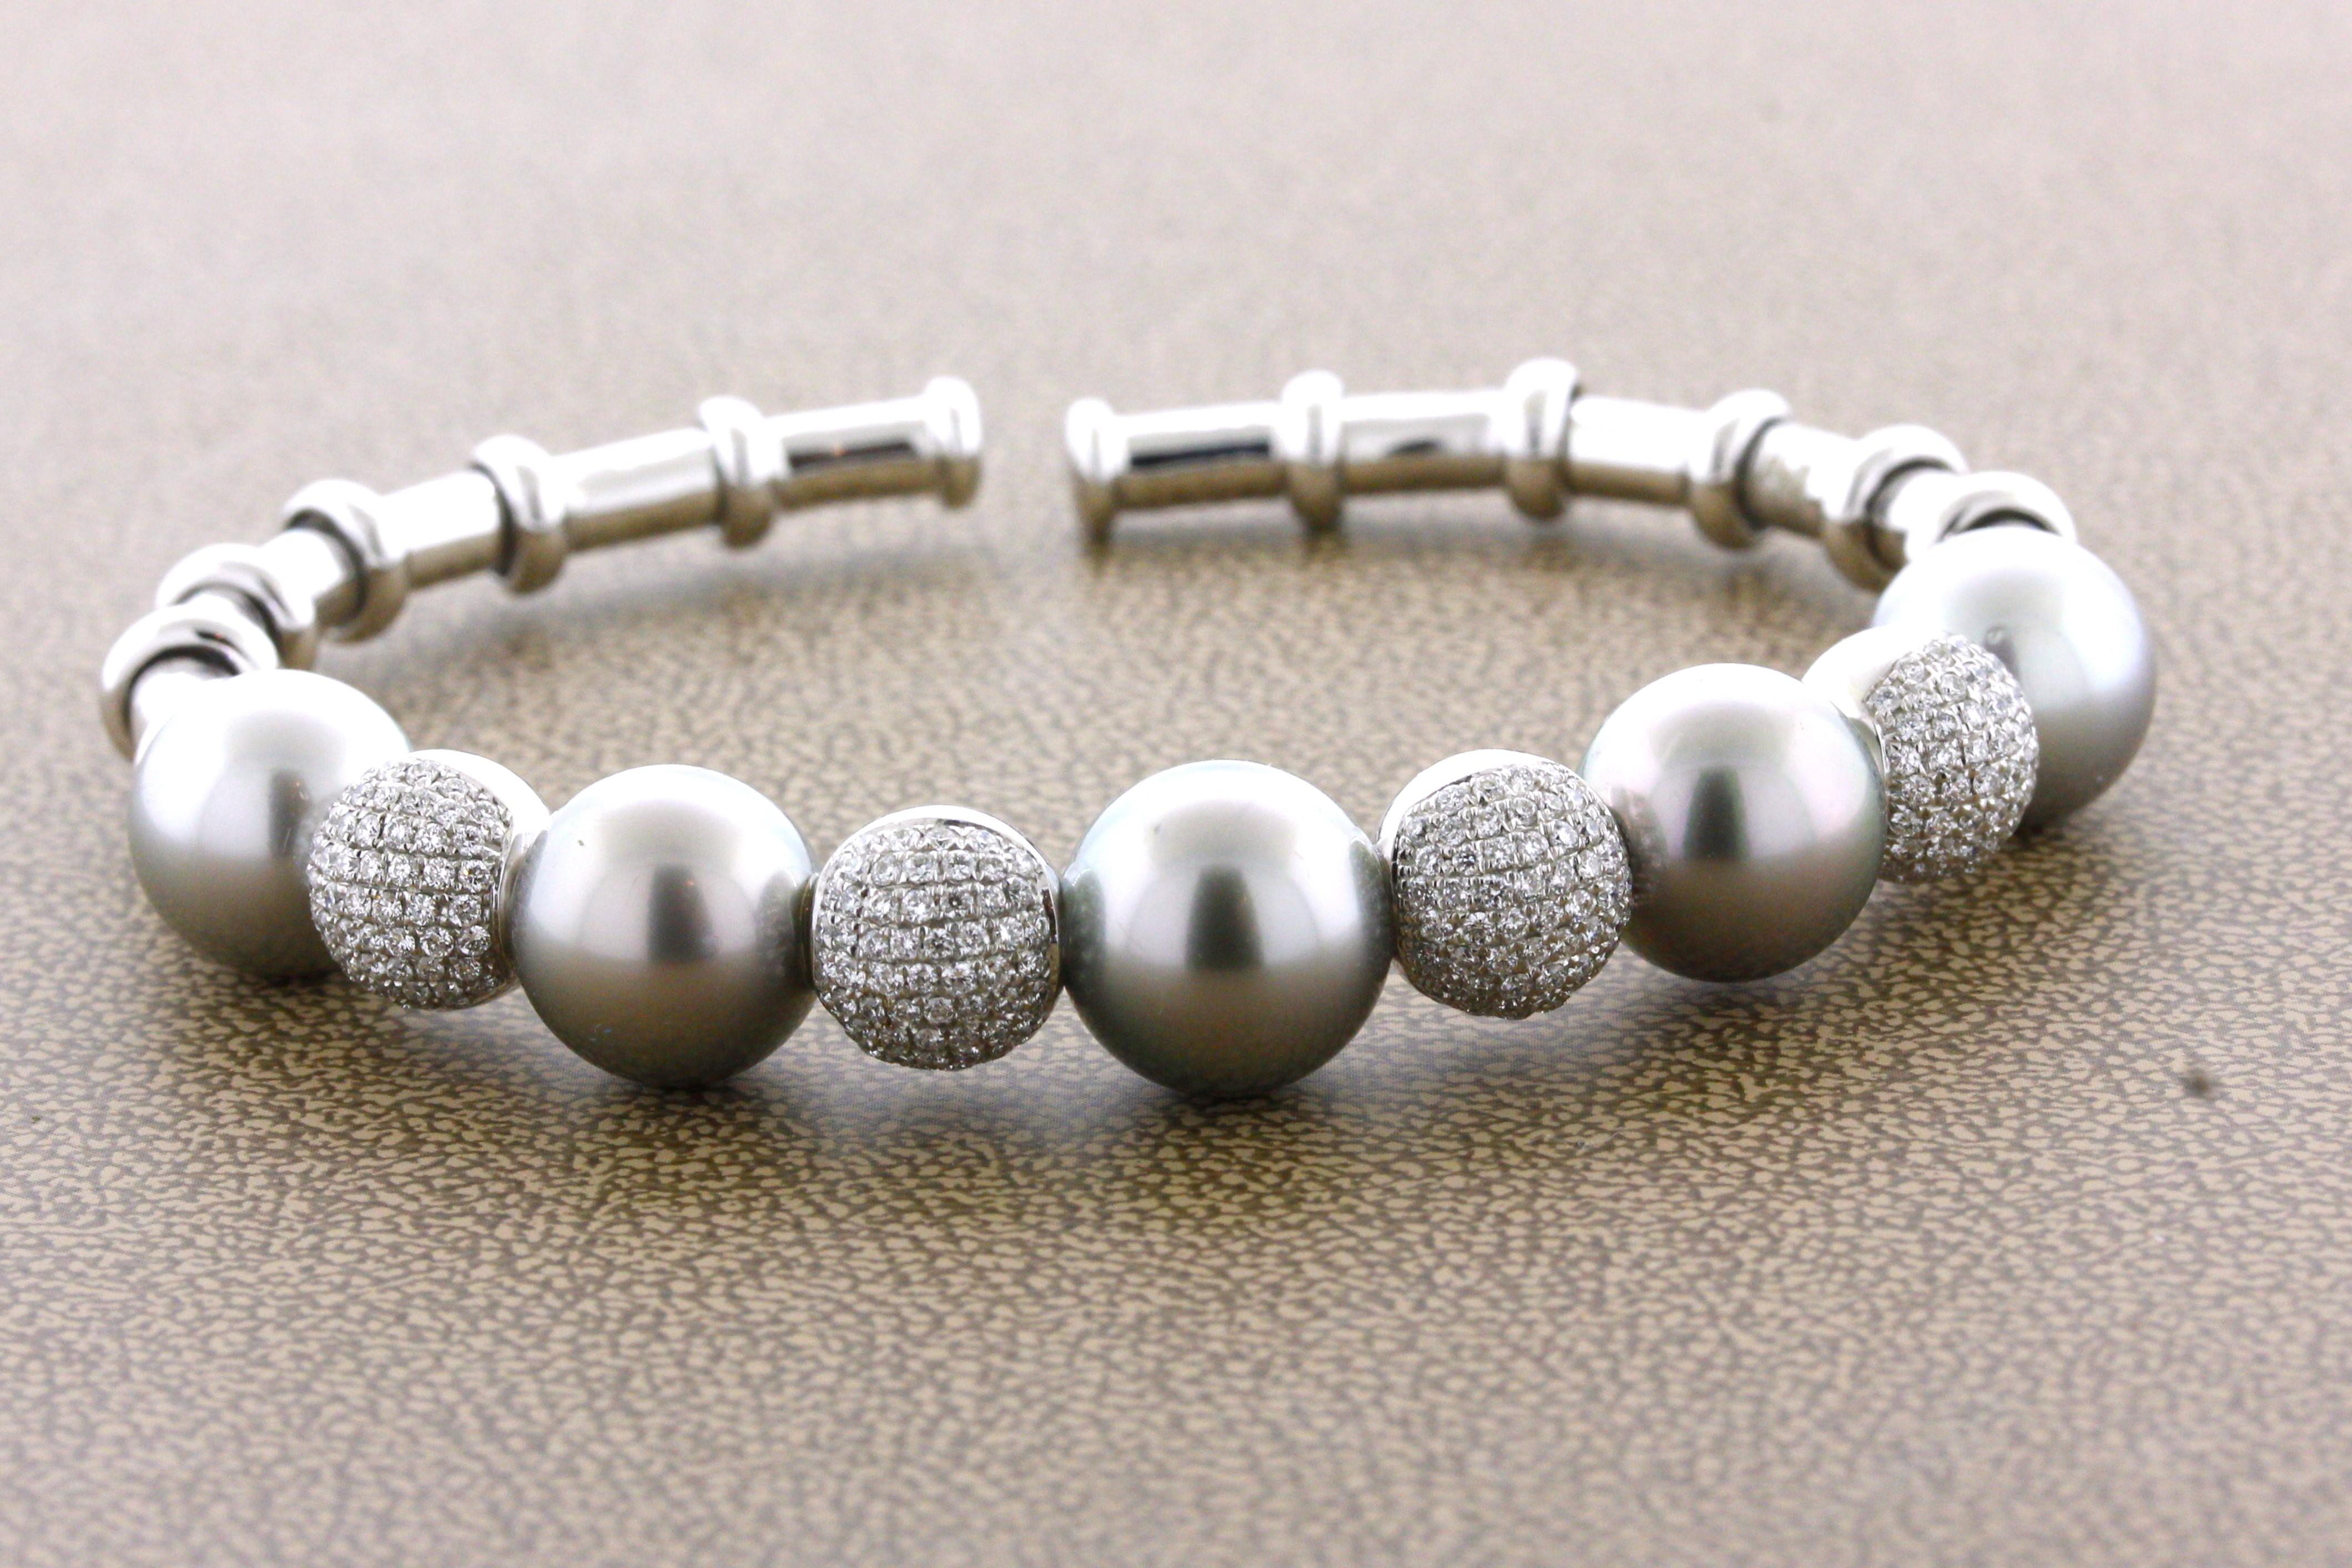 A beautiful and chic bangle featuring 5 high quality matching Tahitian pearls. They measure 10 – 11 millimeters each, are blemish free, and have a rich silver-Tahitian color. Between each pearl is a diamond studded gold sphere which adds brightness